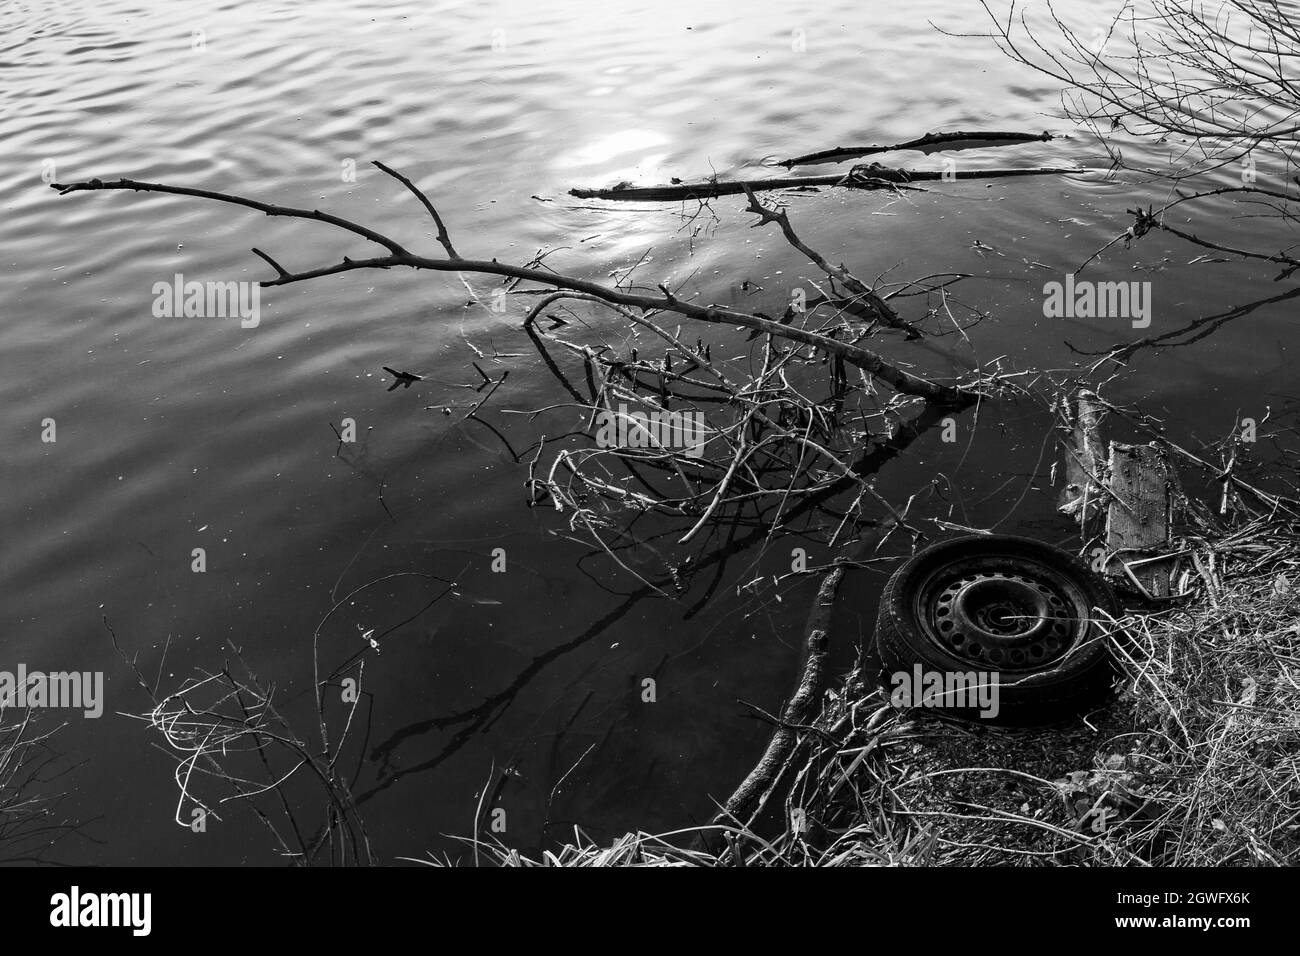 An old discarded wheel amongst branches and vegetation at the bank of the River Great Ouse in St Ives, Cambridgeshire - monochrome Stock Photo